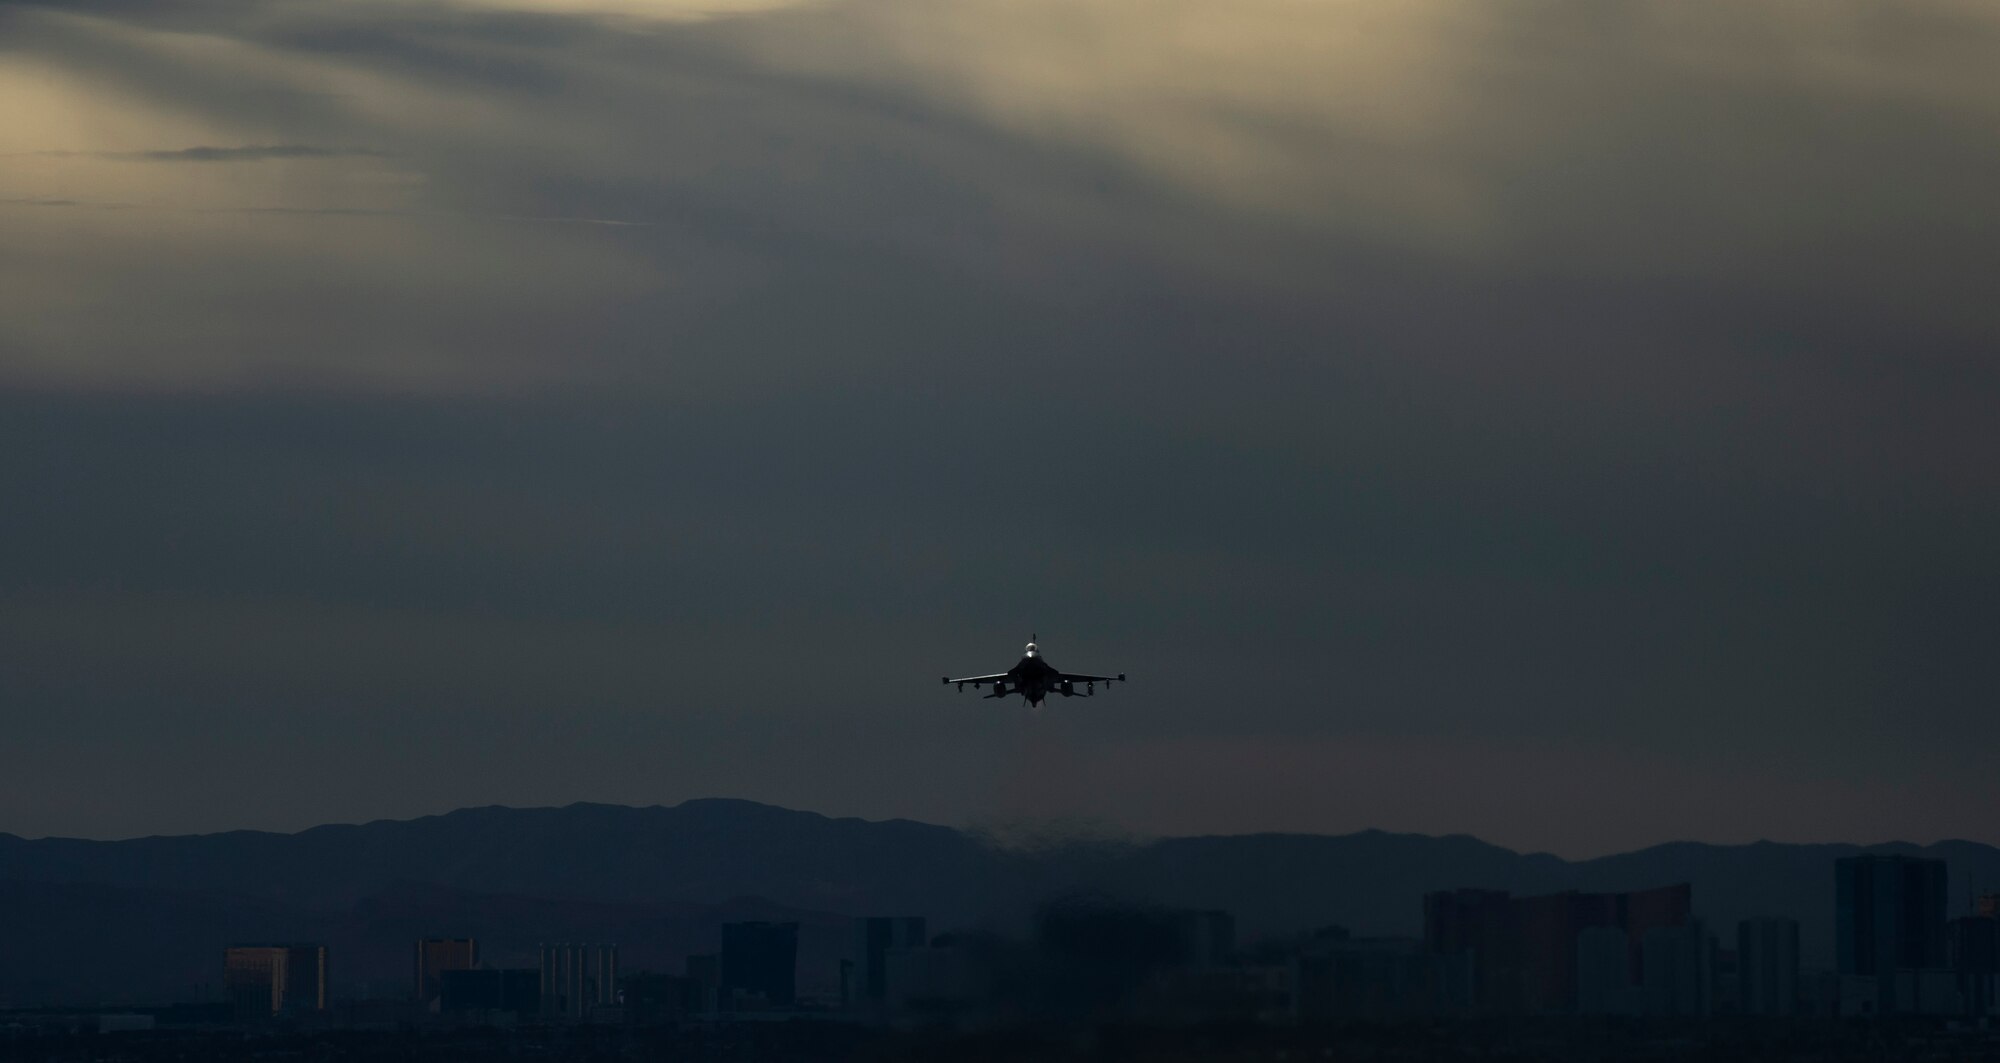 A U.S. Air Force F-16CM Fighting Falcon assigned to the 79th Fighter Squadron (FS) takes-off from the flightline during Exercise Red Flag 19-1 at Nellis Air Force Base, Nev., Jan. 28, 2019.